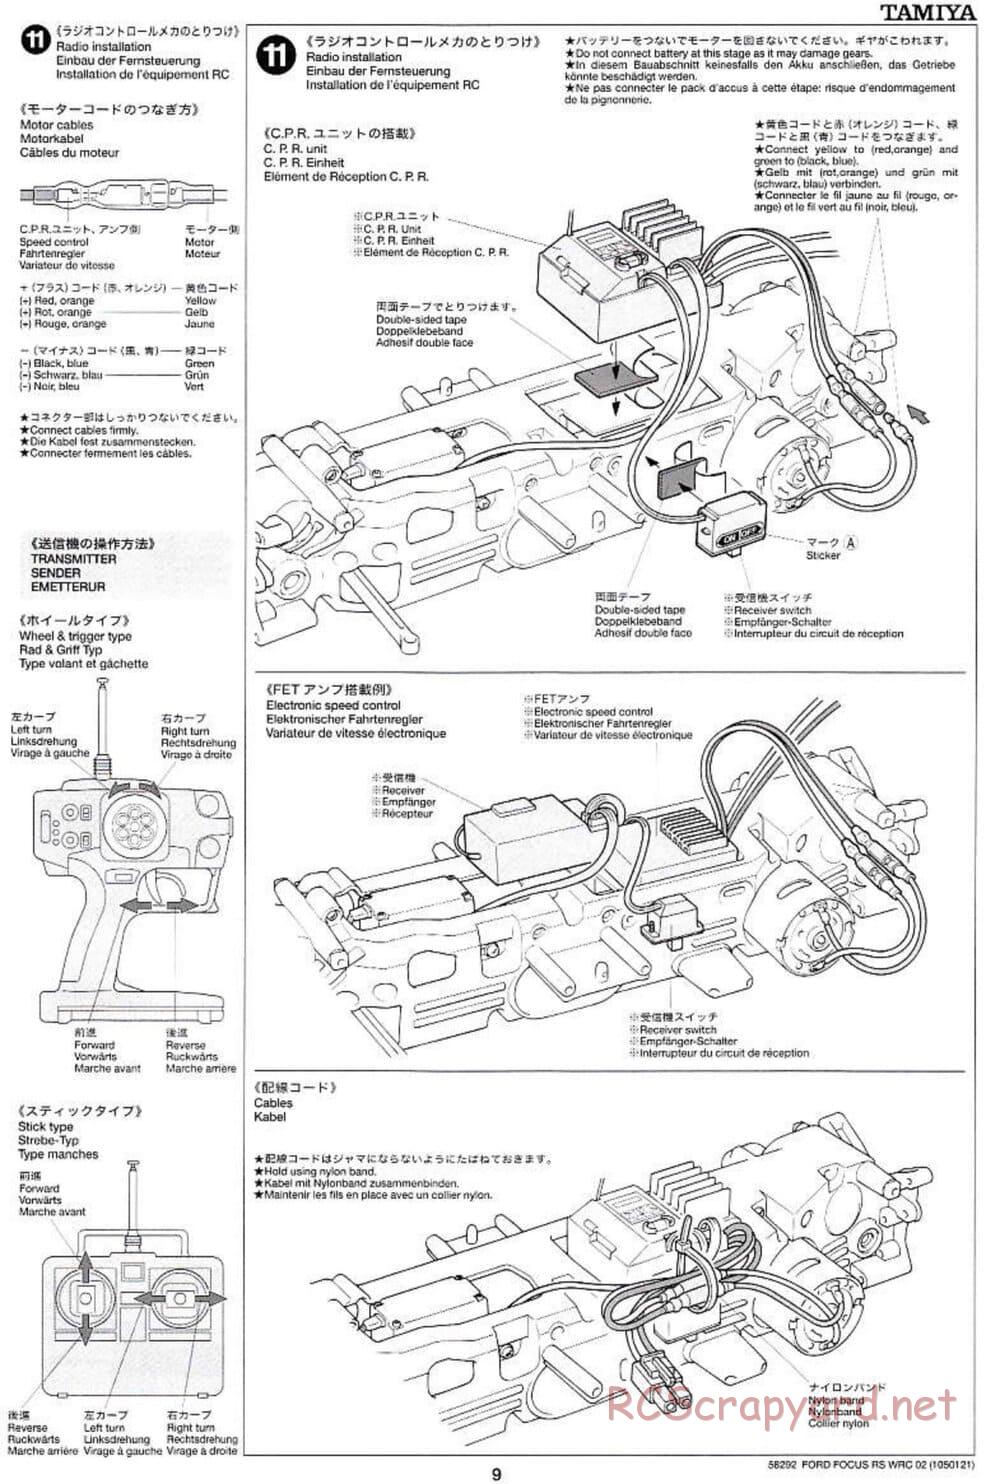 Tamiya - Ford Focus RS WRC 02 - TL-01 Chassis - Manual - Page 9